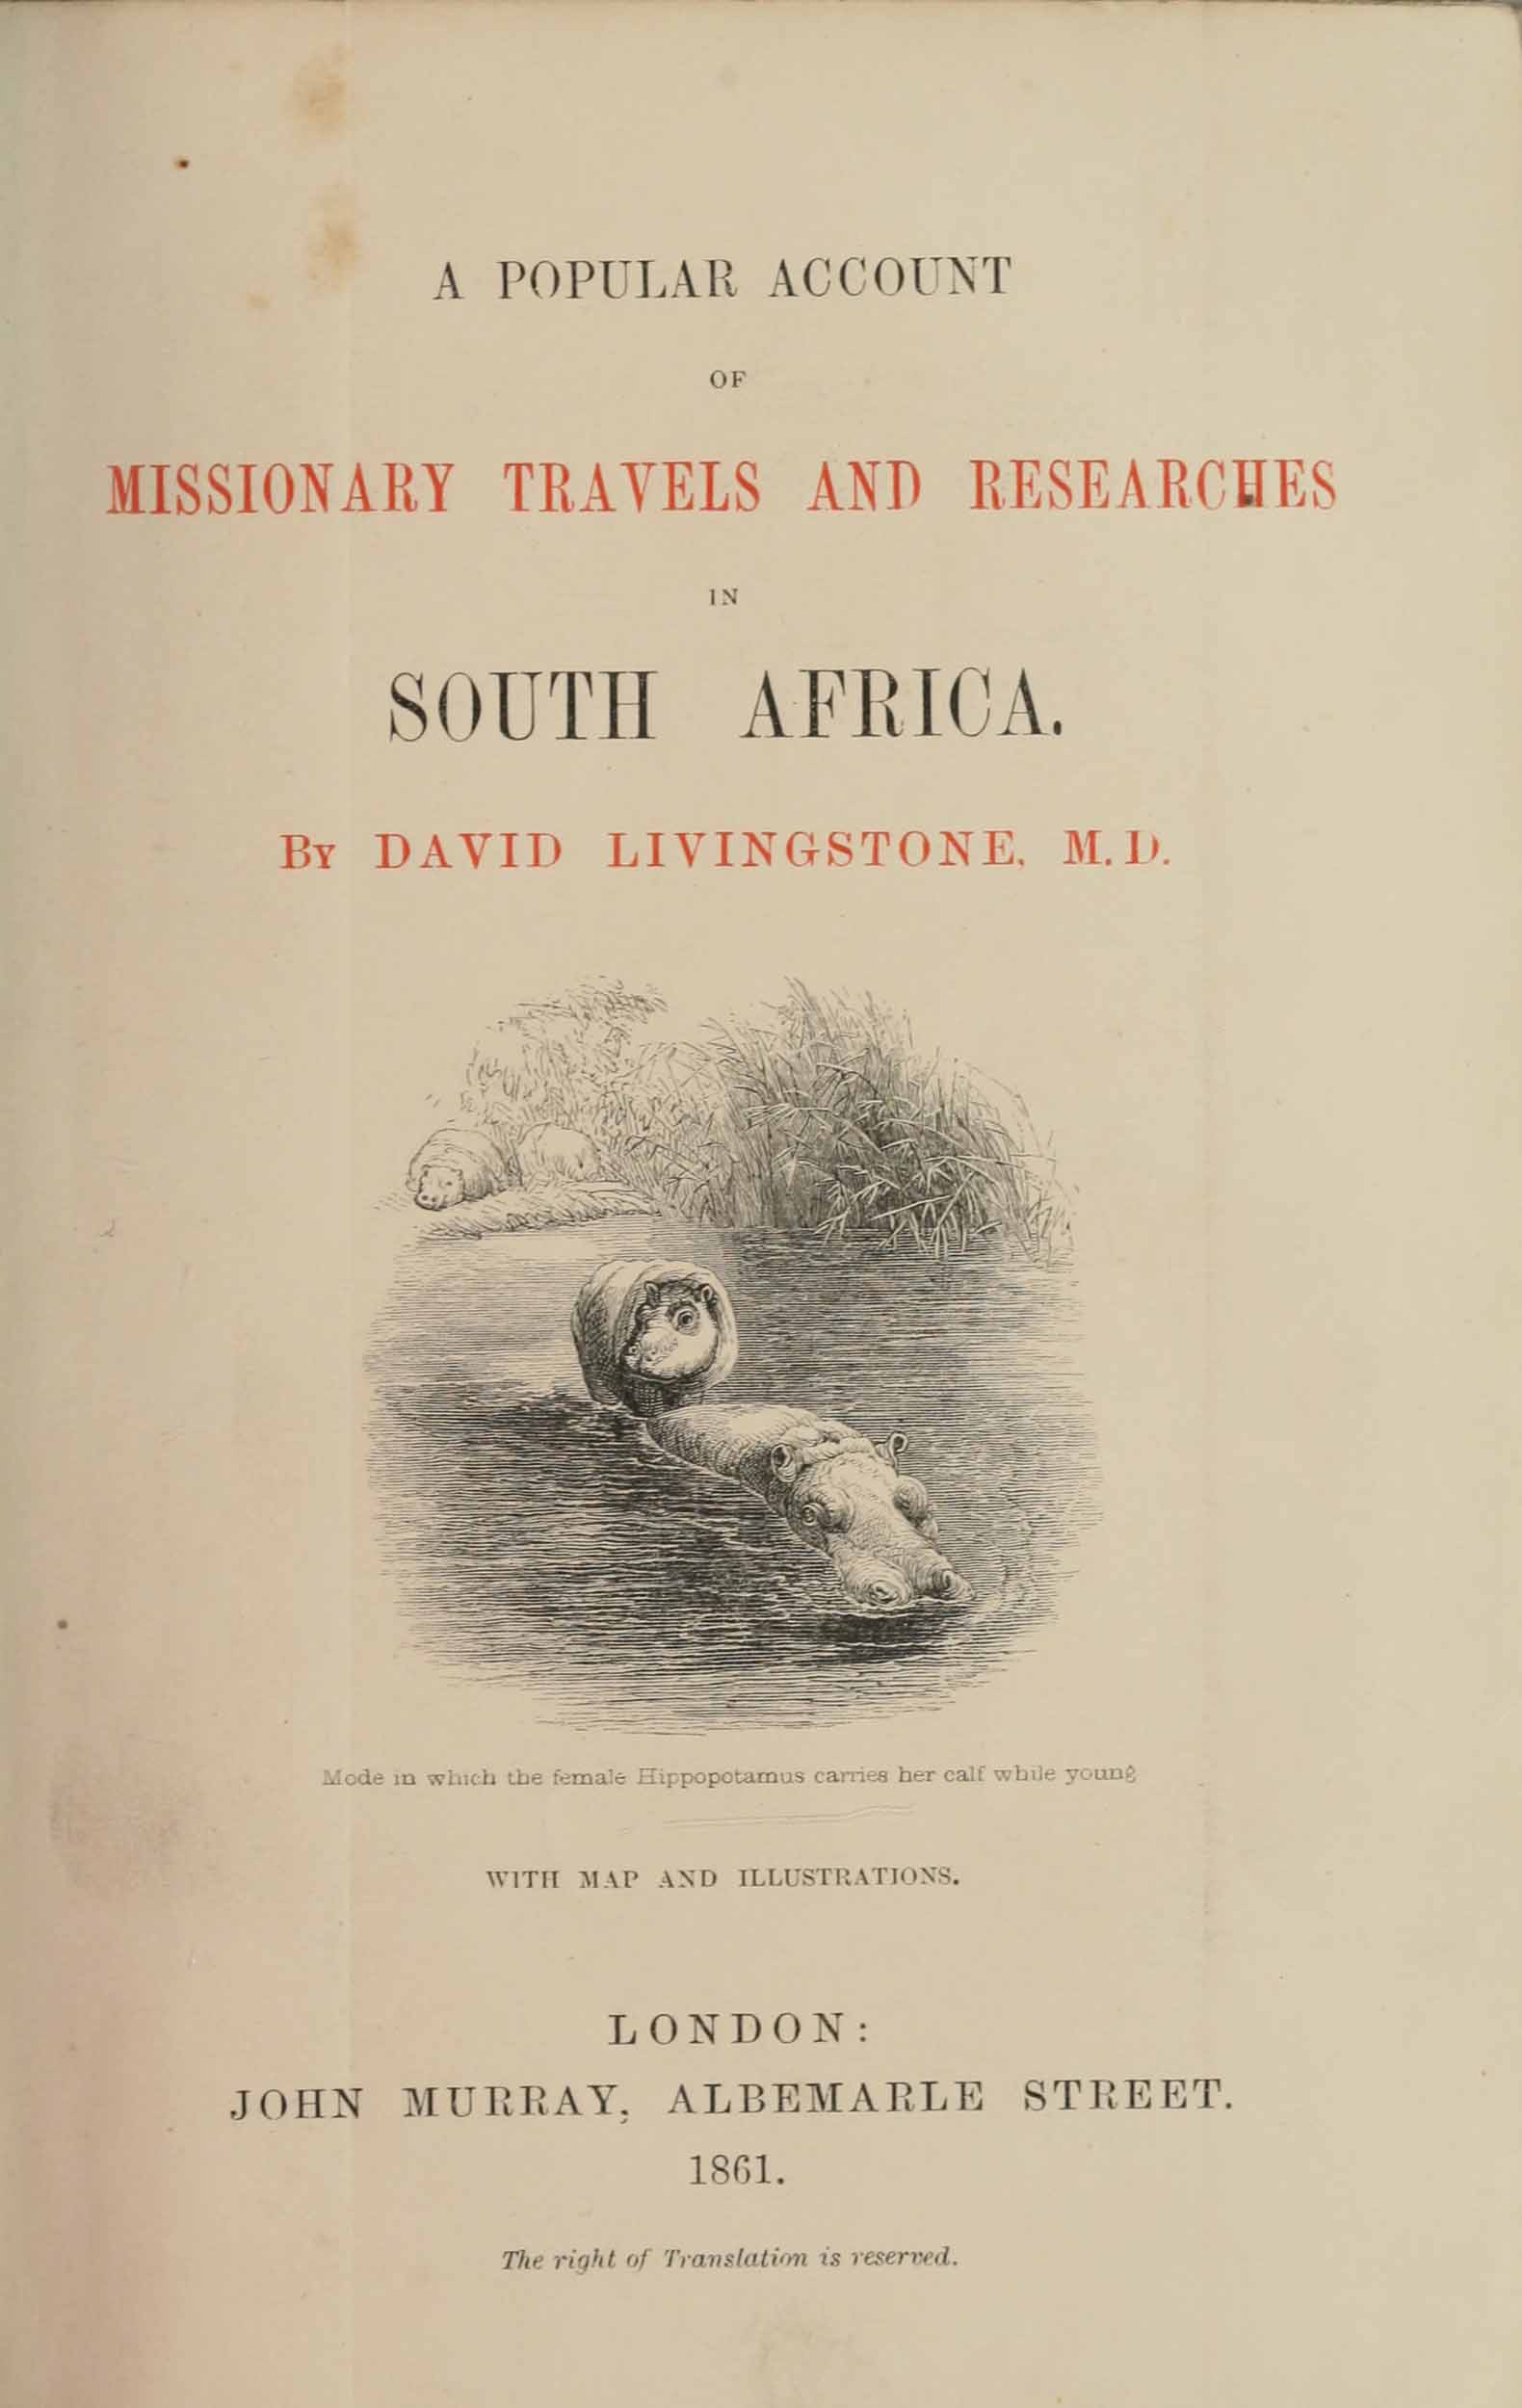 A Popular Account of Missionary Travels and Researches in South Africa (John Murray, London), 1861, by David Livingstone. Internet Archive(https://archive.org/details/popularaccountof00livi).